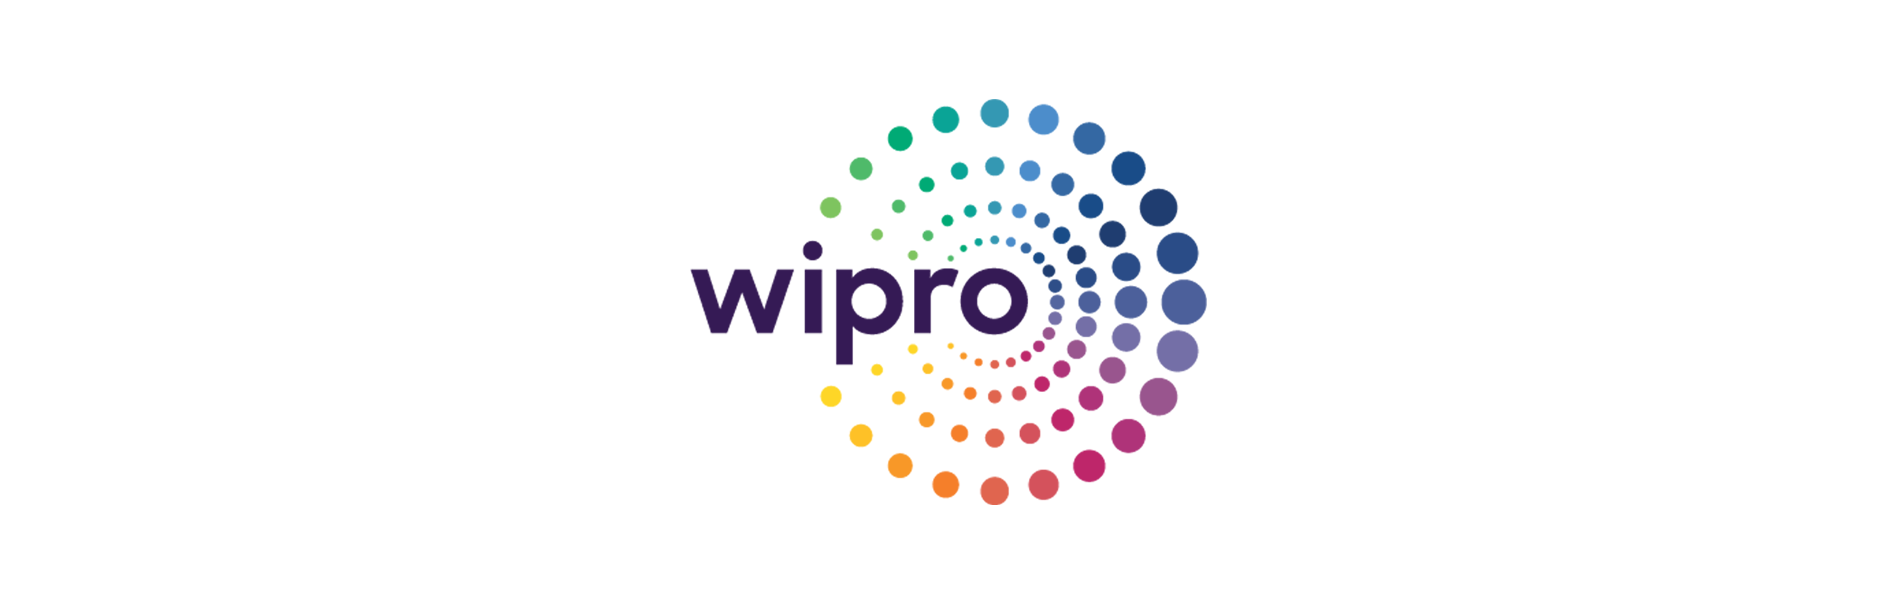 Wipro’s LiVE Workspace™ Connect